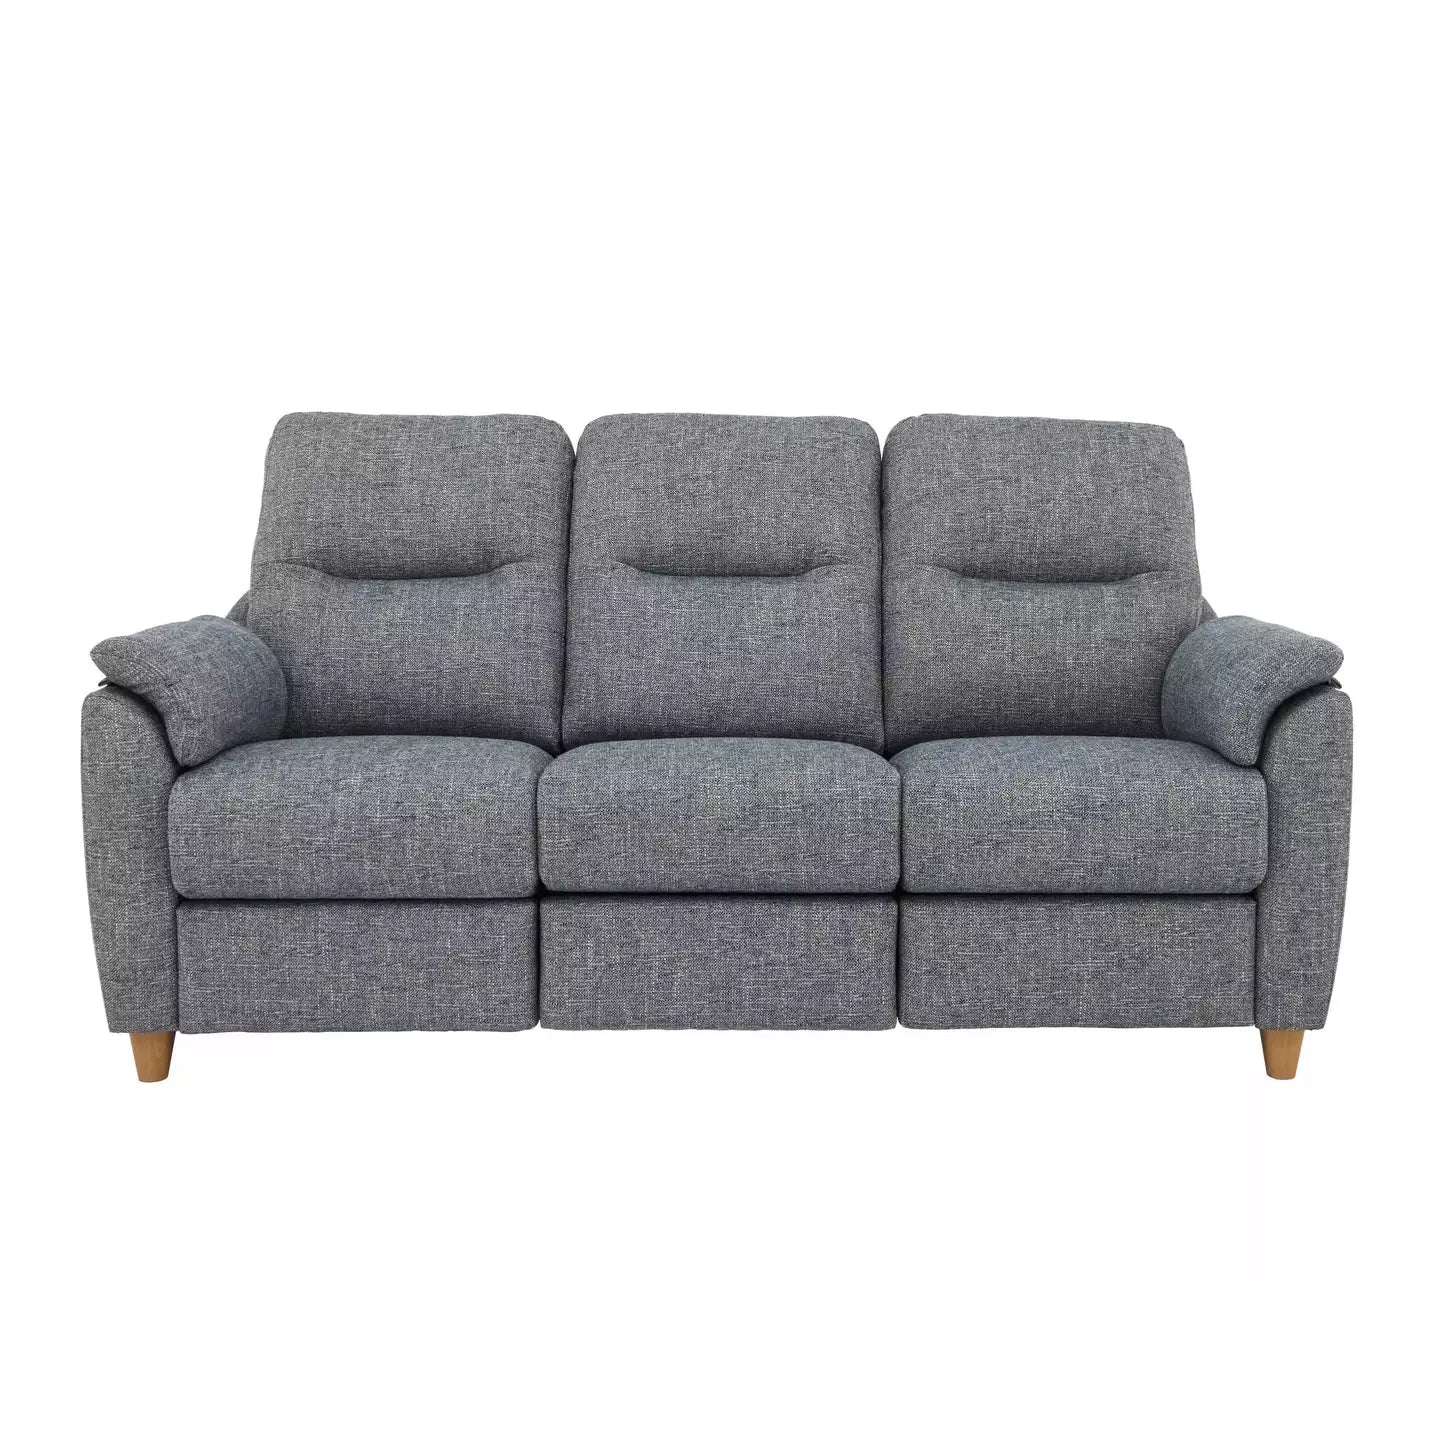 G Plan Spencer 3 Seater Sofa in Fabric